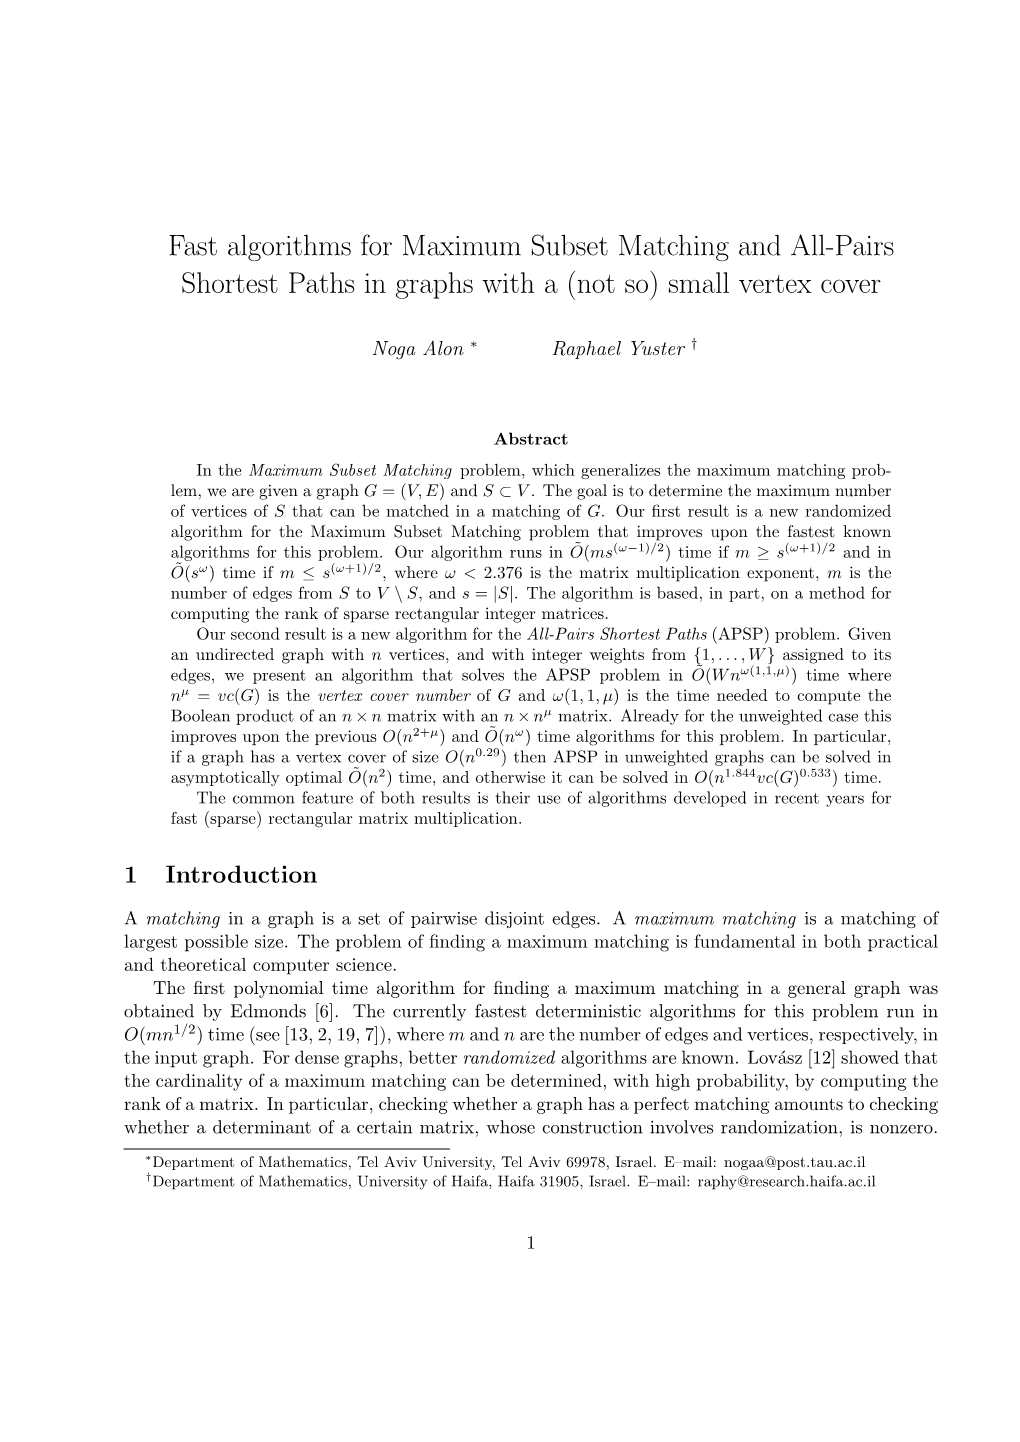 Fast Algorithms for Maximum Subset Matching and All-Pairs Shortest Paths in Graphs with a (Not So) Small Vertex Cover